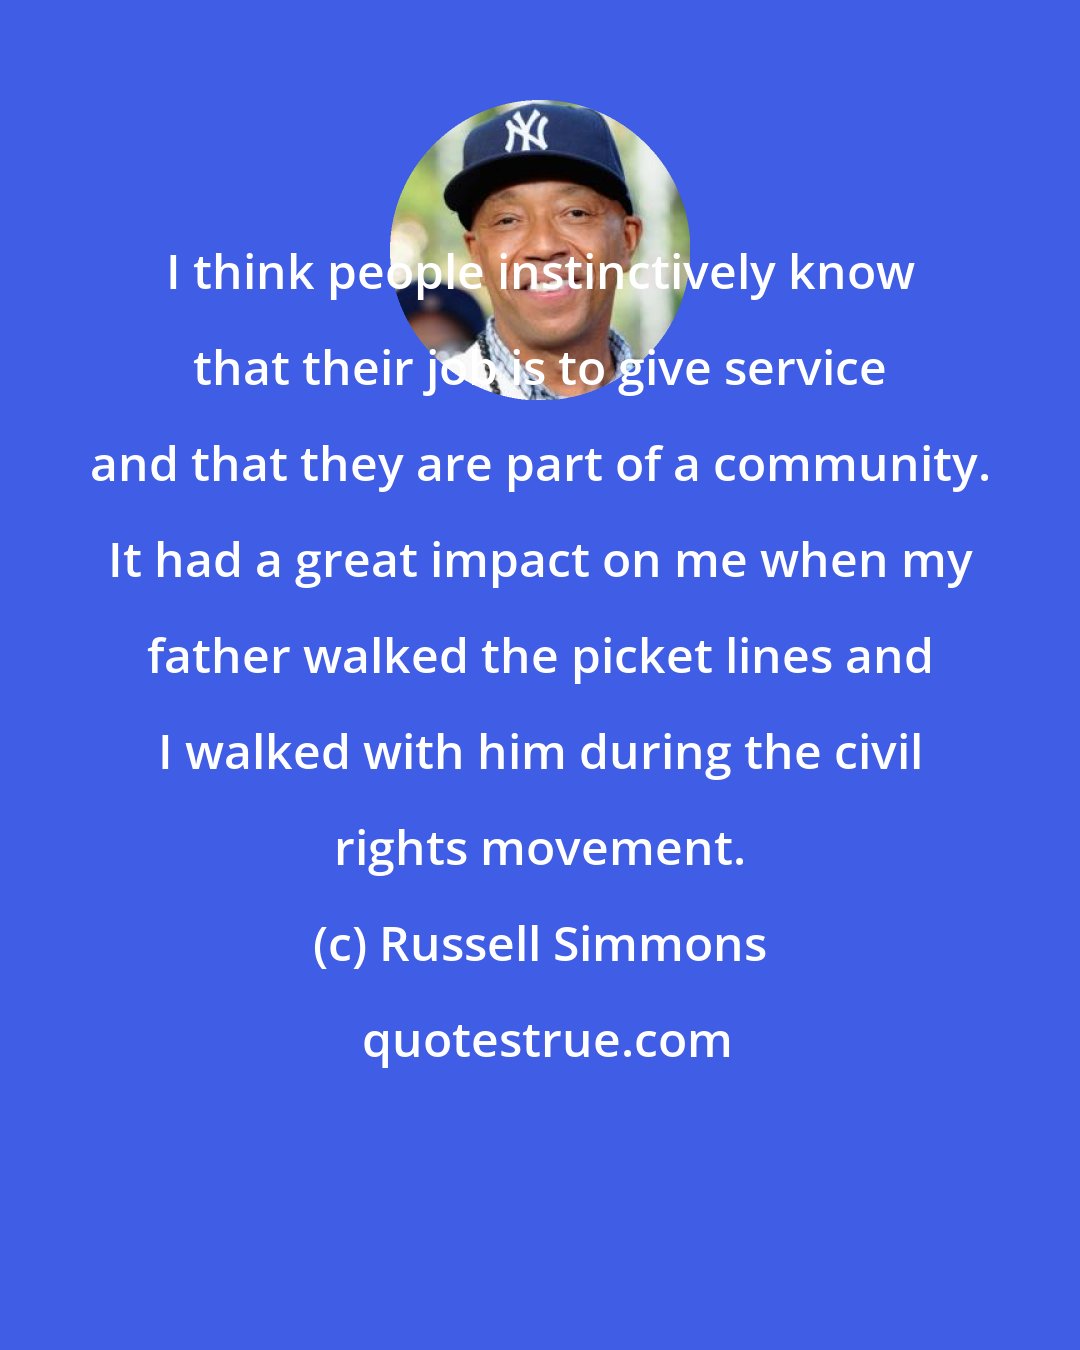 Russell Simmons: I think people instinctively know that their job is to give service and that they are part of a community. It had a great impact on me when my father walked the picket lines and I walked with him during the civil rights movement.